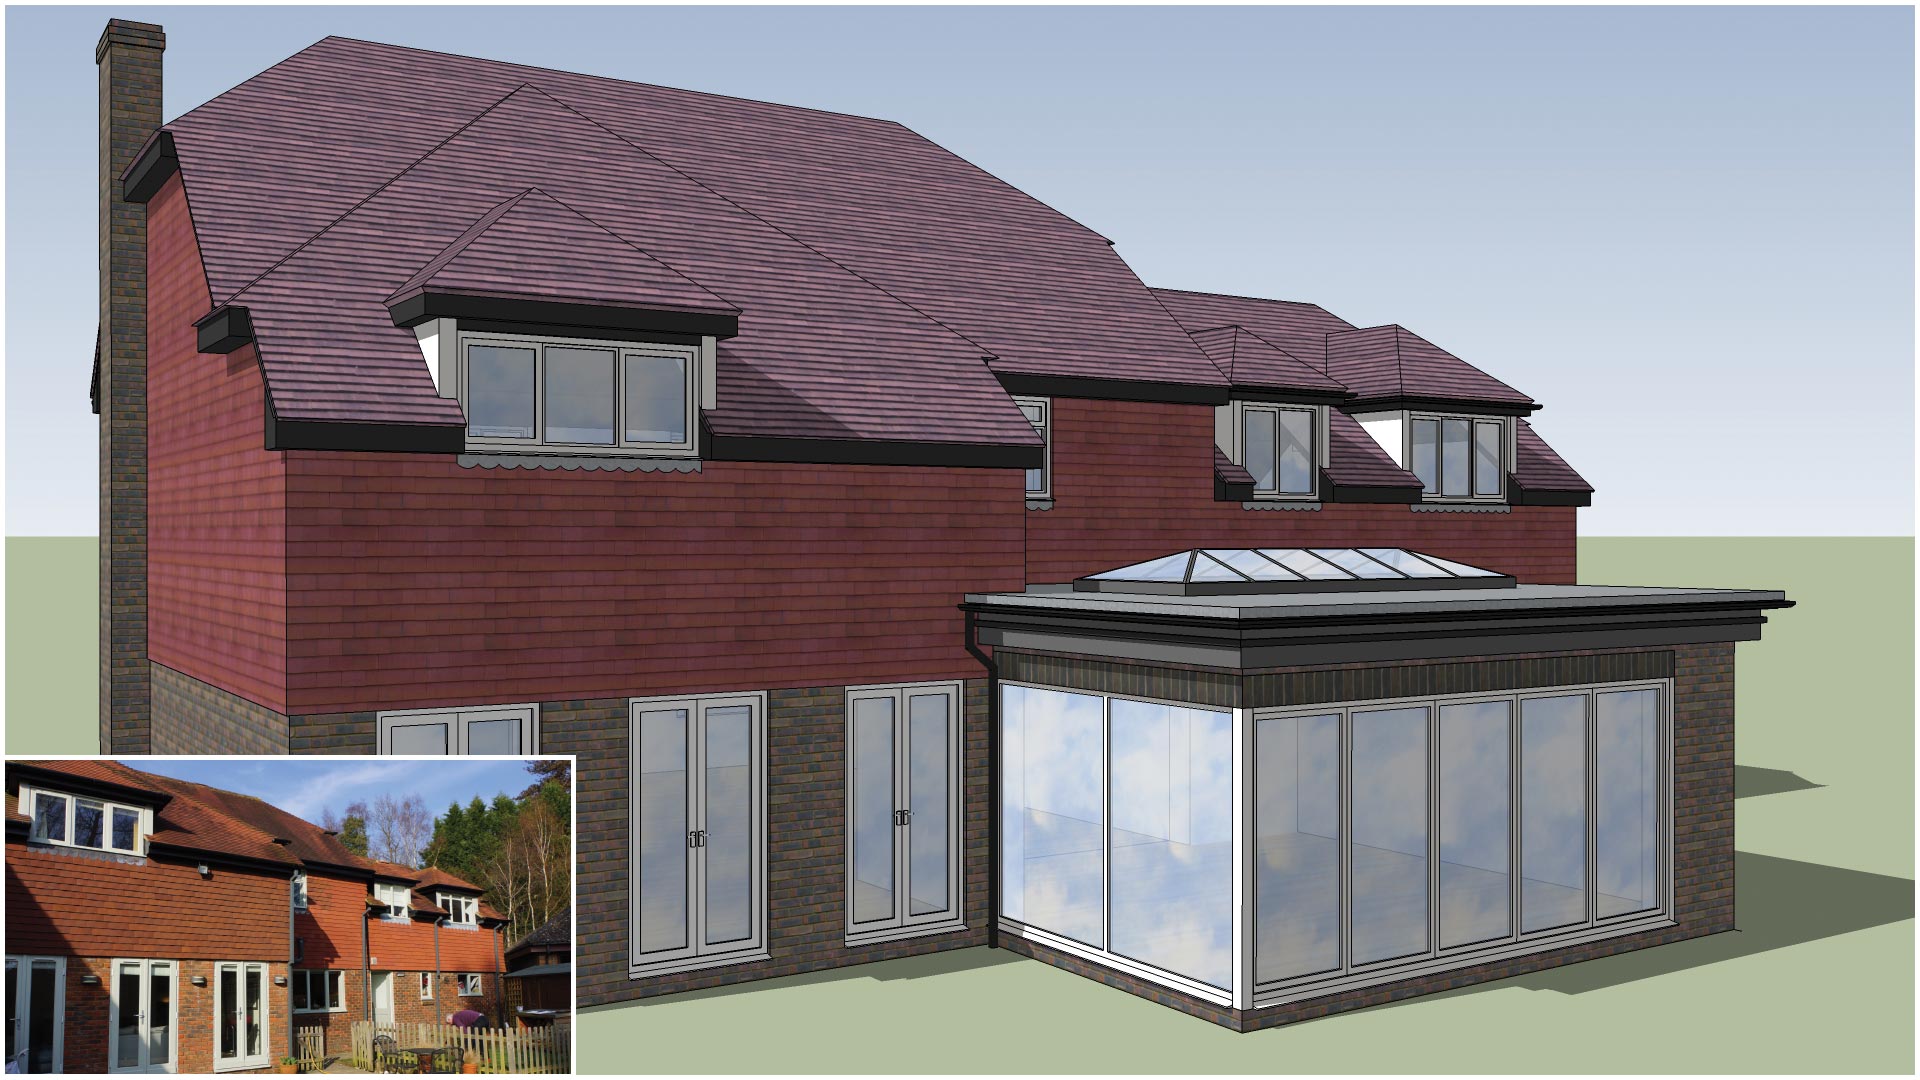 Flat Roof Sun Room Extension with Lantern - Design By PB Properties